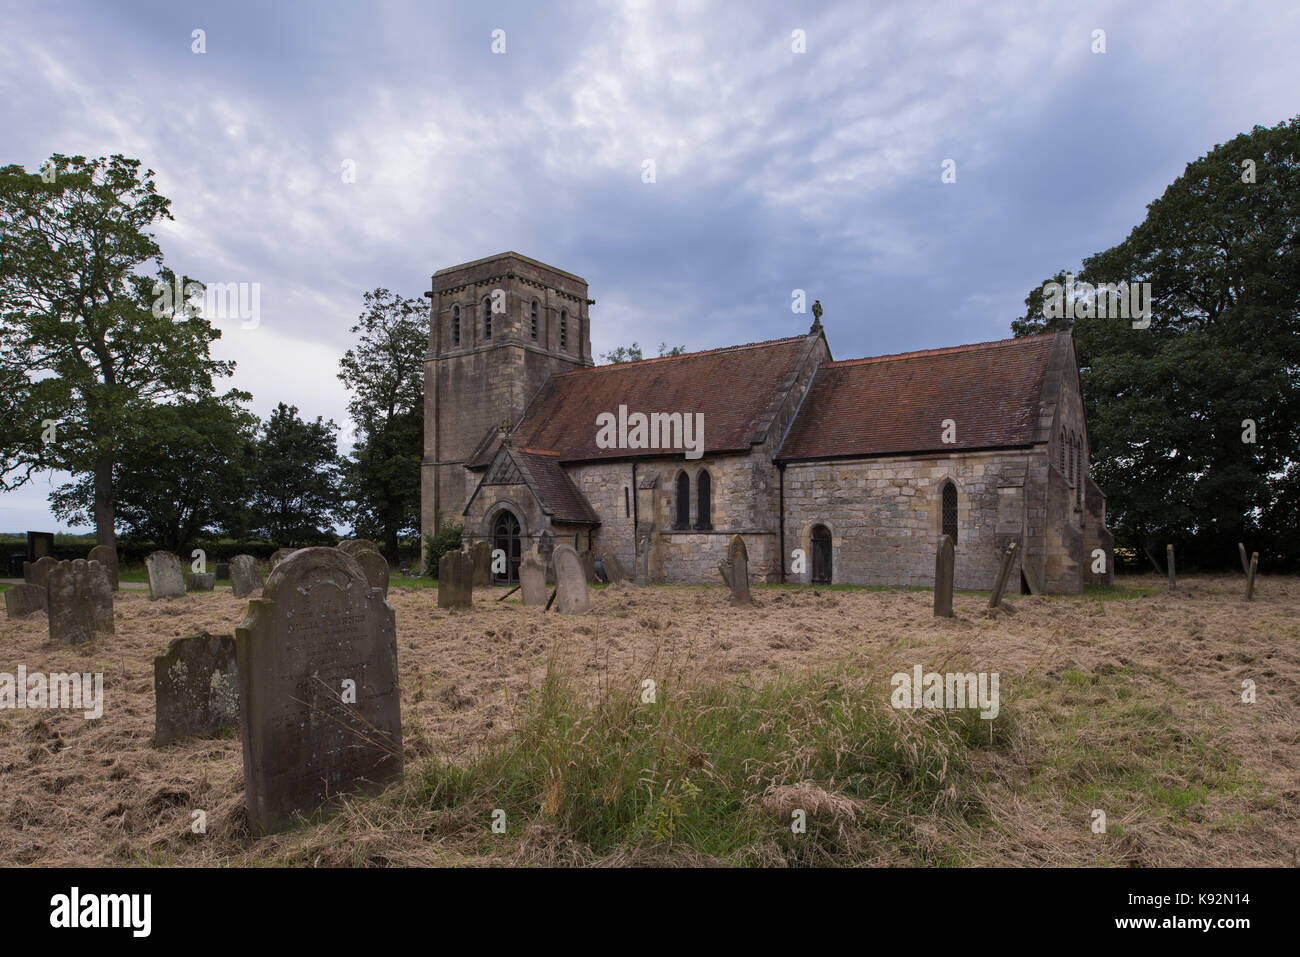 Summer evening view by headstones in the churchyard, of the exterior of historic All Saints' Church, Moor Monkton, North Yorkshire, England, UK. Stock Photo